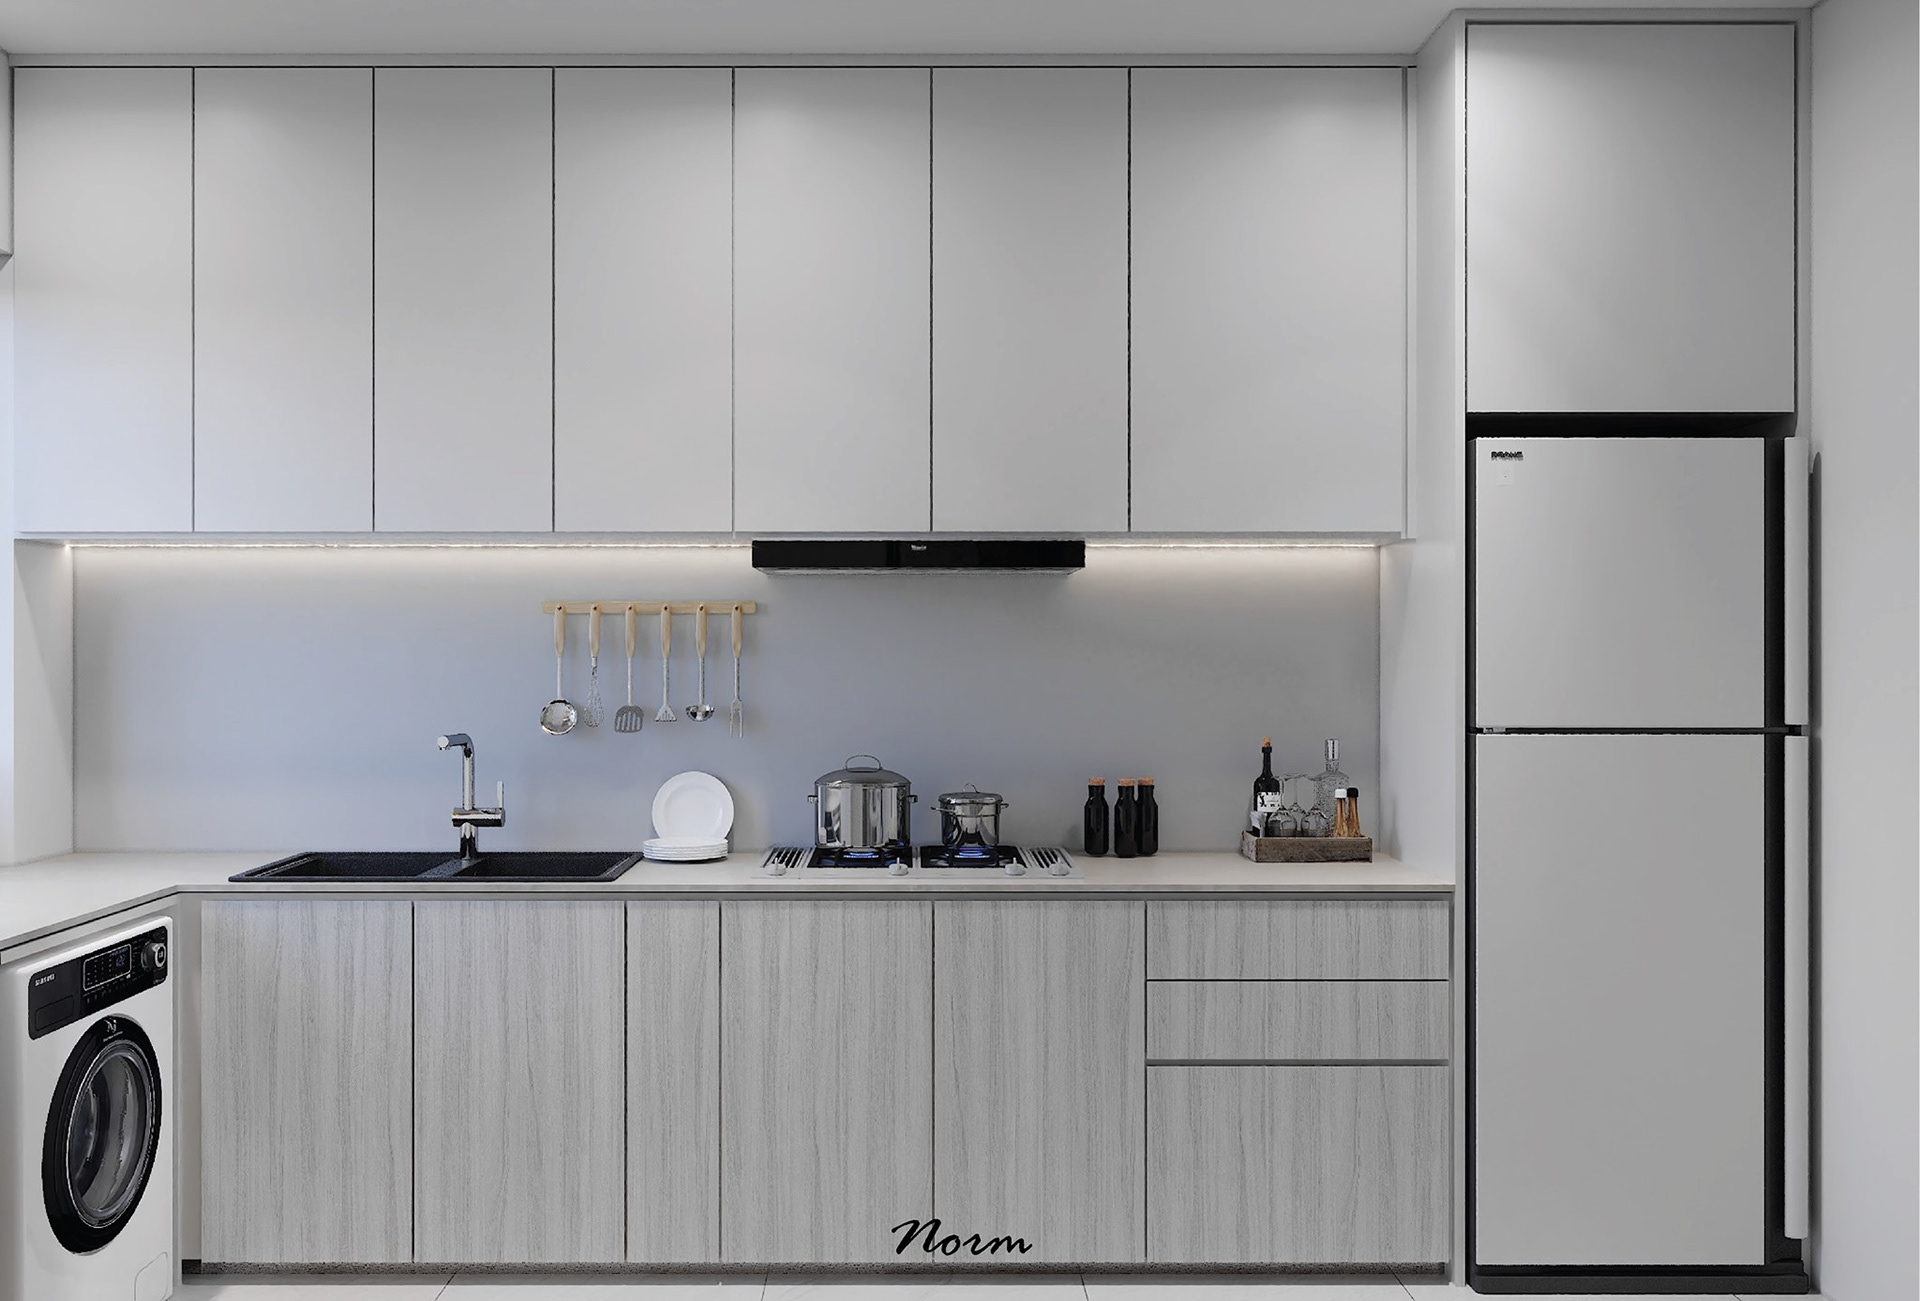 A wall cabinet system with many compartments meets storage needs in the kitchen. It not only maintains the area's aesthetics but also saves space.